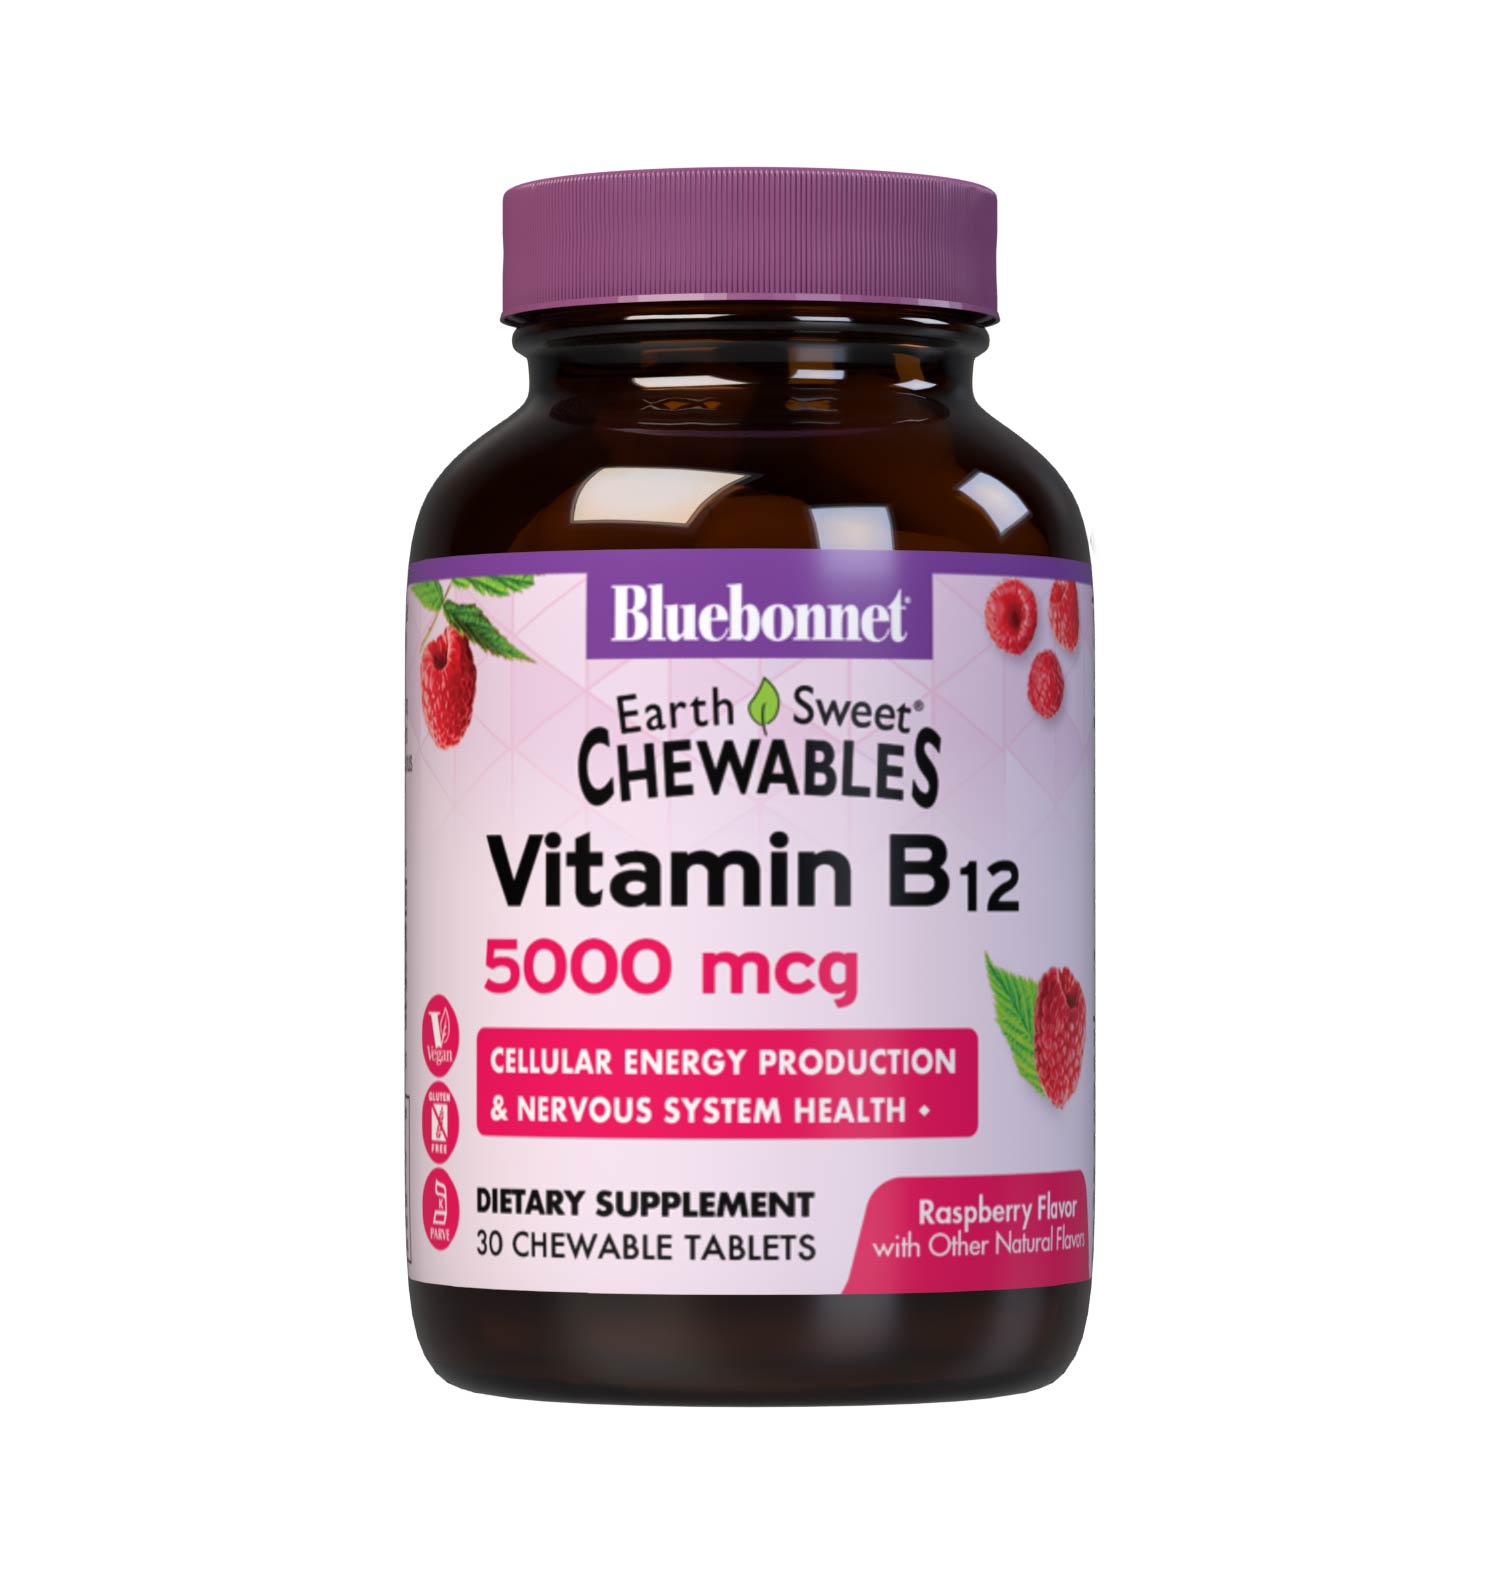 Bluebonnet’s EarthSweet Chewables Vitamin B12 5000 mcg Tablets are formulated with crystalline vitamin B12 that supports cellular energy production and nervous system health in a delicious raspberry flavor. Sweetened with EarthSweet, a proprietary sweetening mix of fruit powders and sugar cane crystals. 30 chewable tablets bottle. #size_30 count